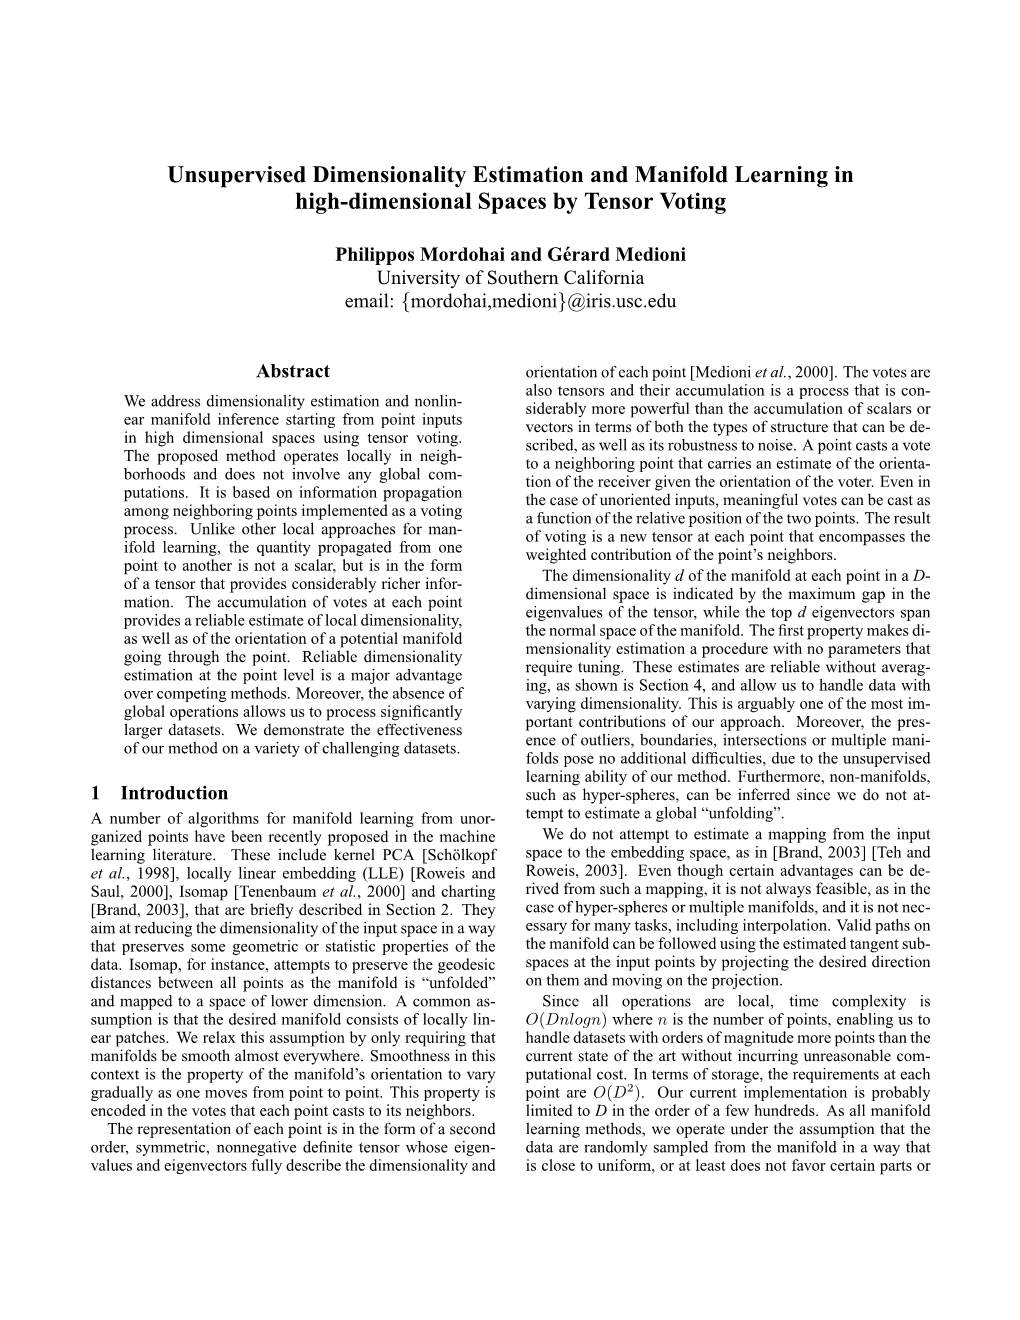 Unsupervised Dimensionality Estimation and Manifold Learning in High-Dimensional Spaces by Tensor Voting